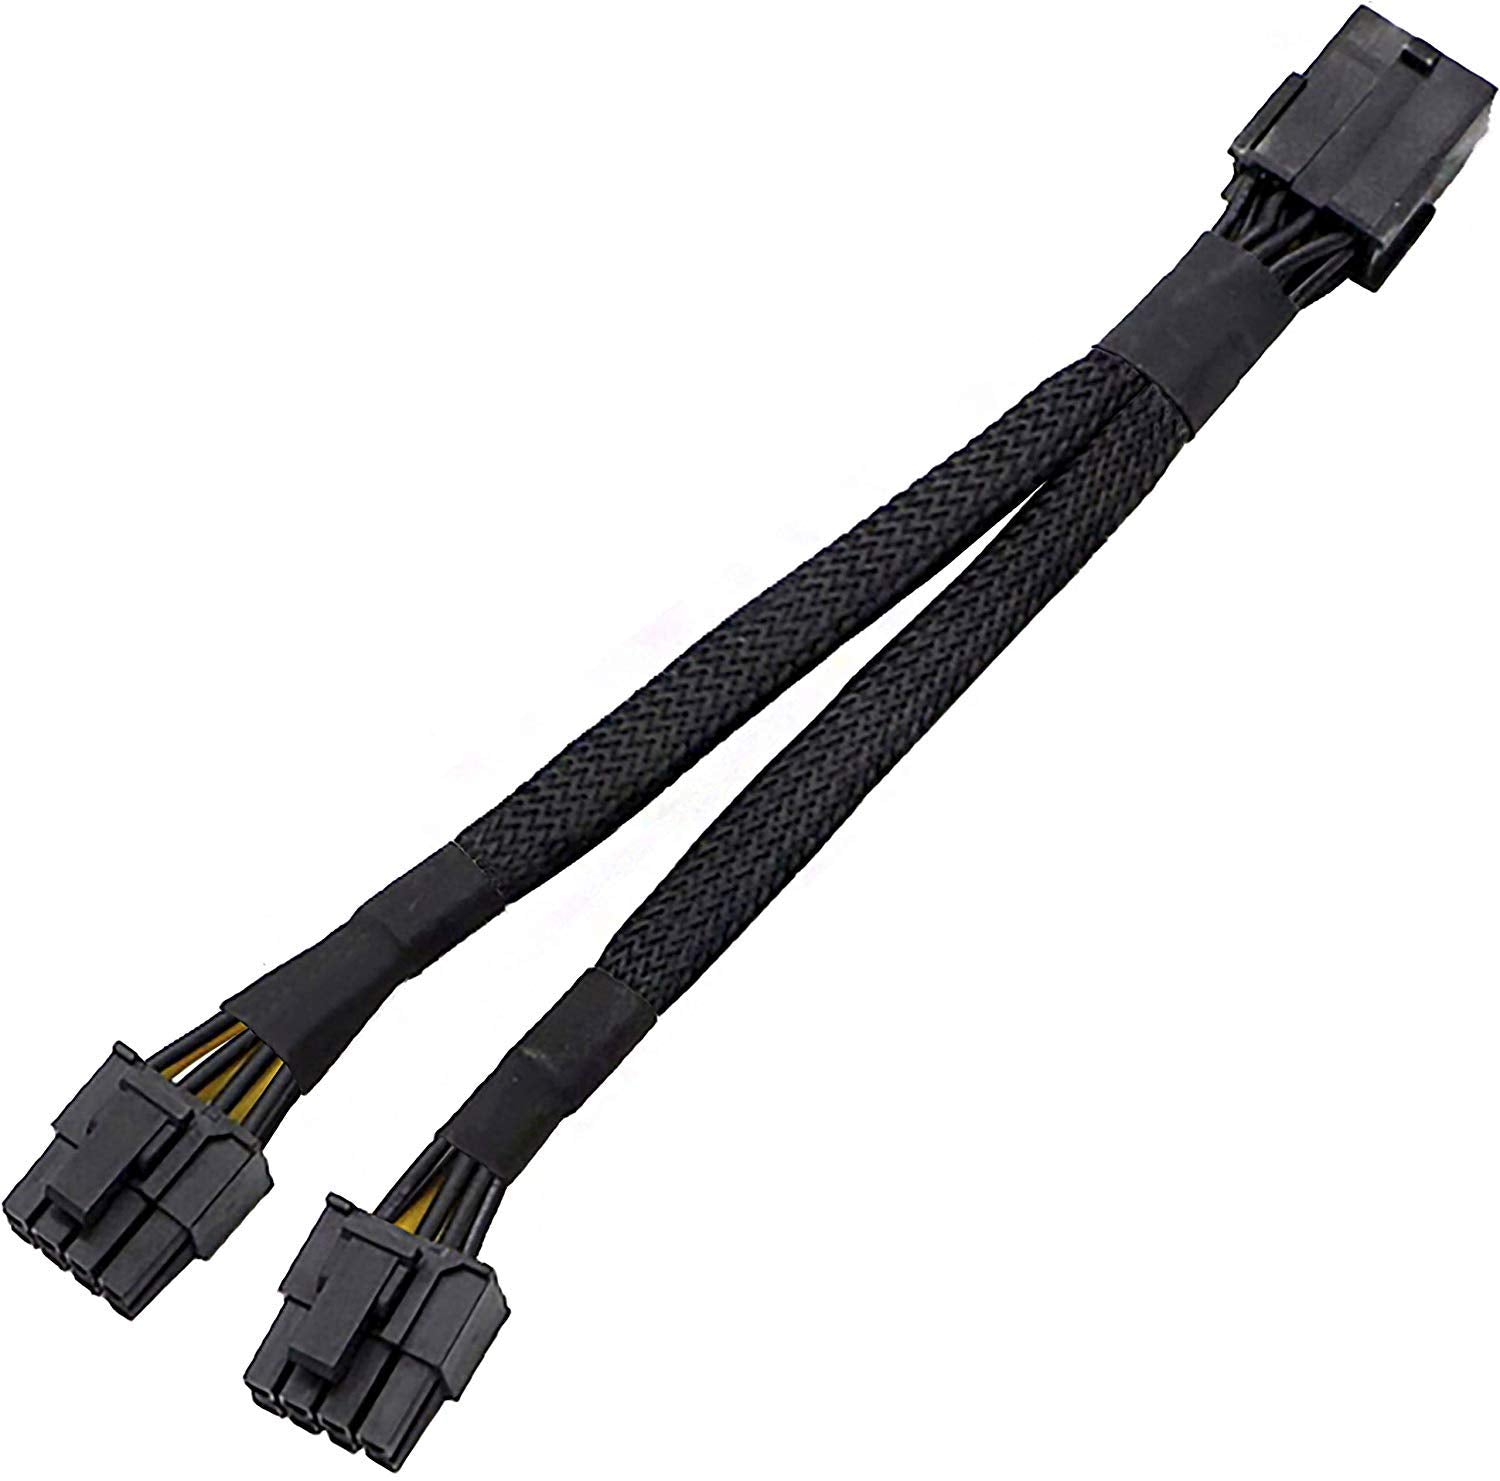 8 Pin Power Cable For Graphics Card